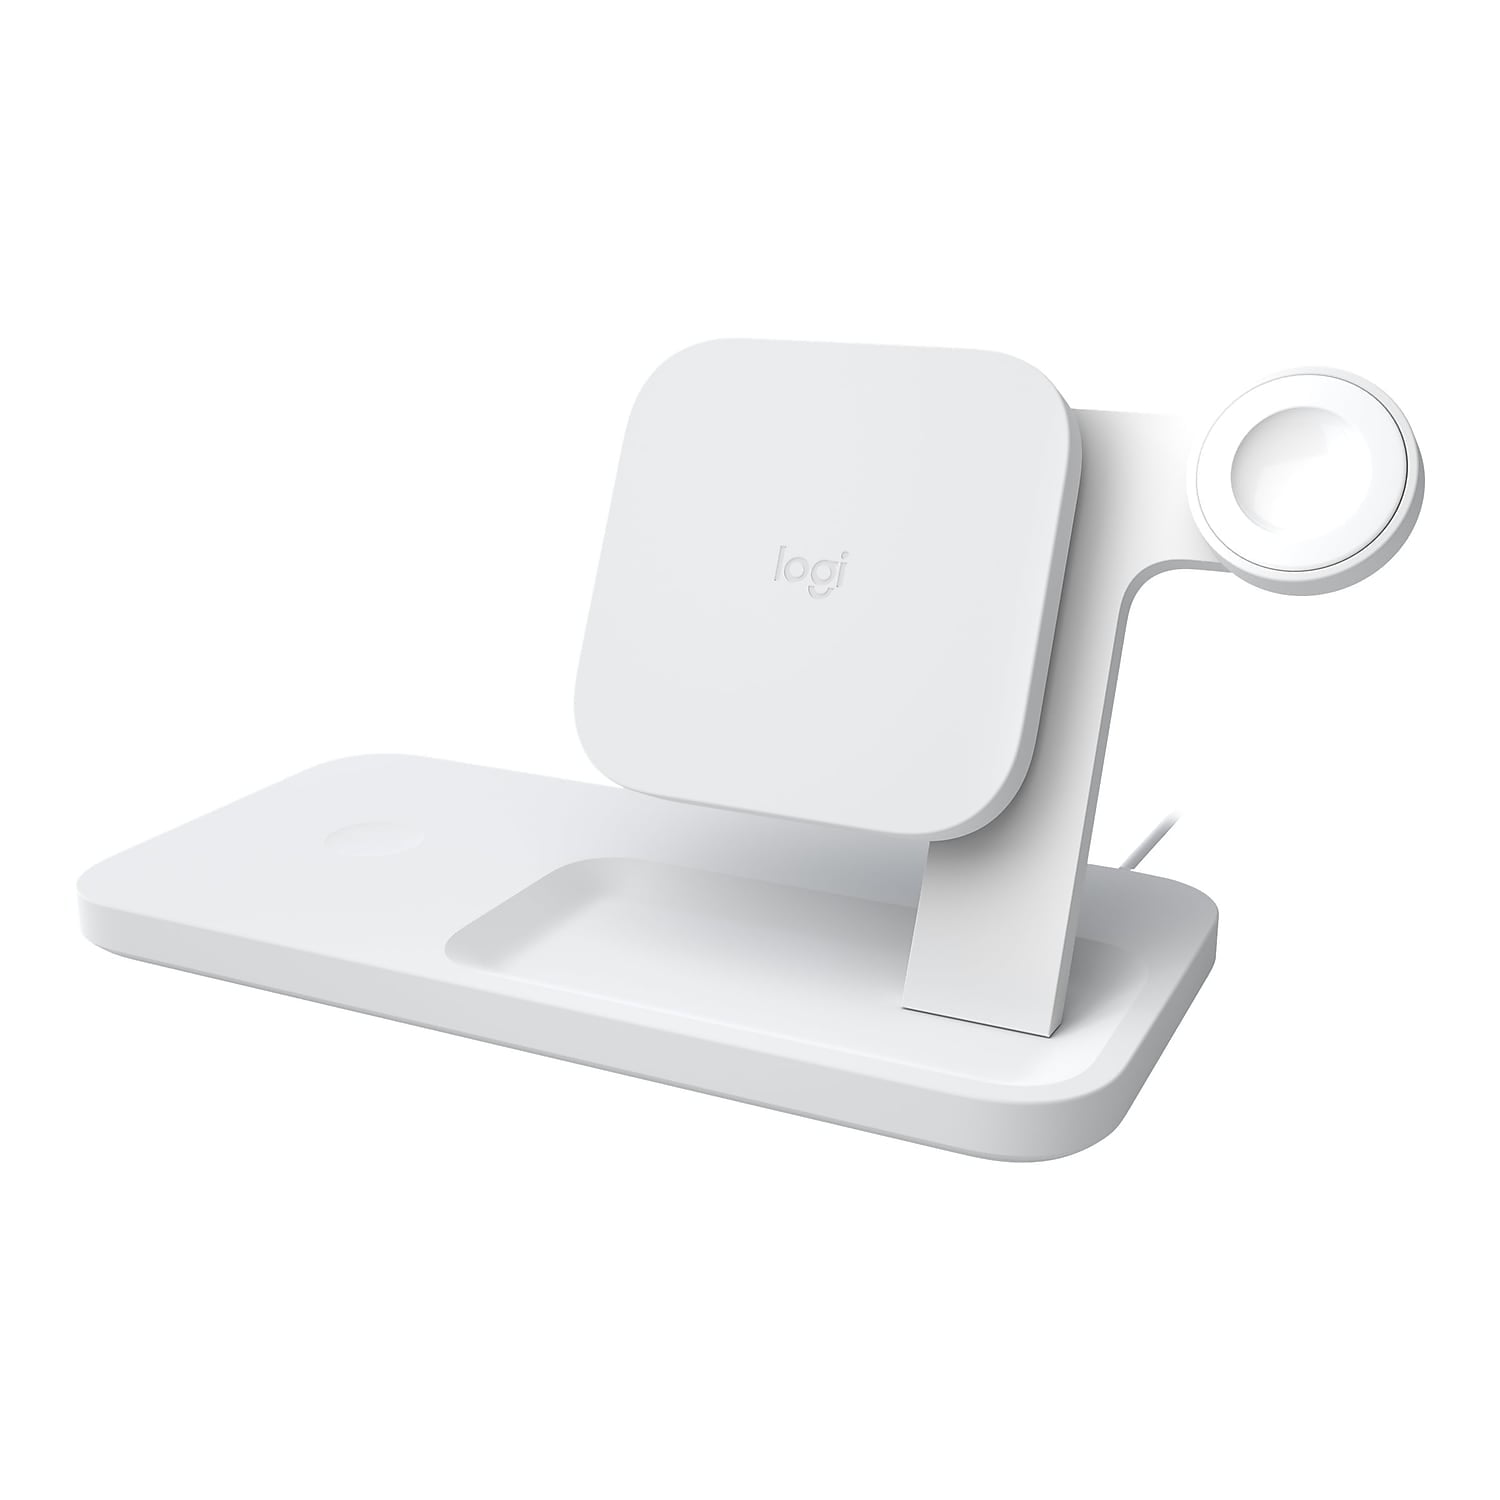 Gensidig Terminal Indeholde Logitech Powered 3-in-1 Wireless Charging Dock for iPhone, AirPods, and  Apple Watch, White - Walmart.com